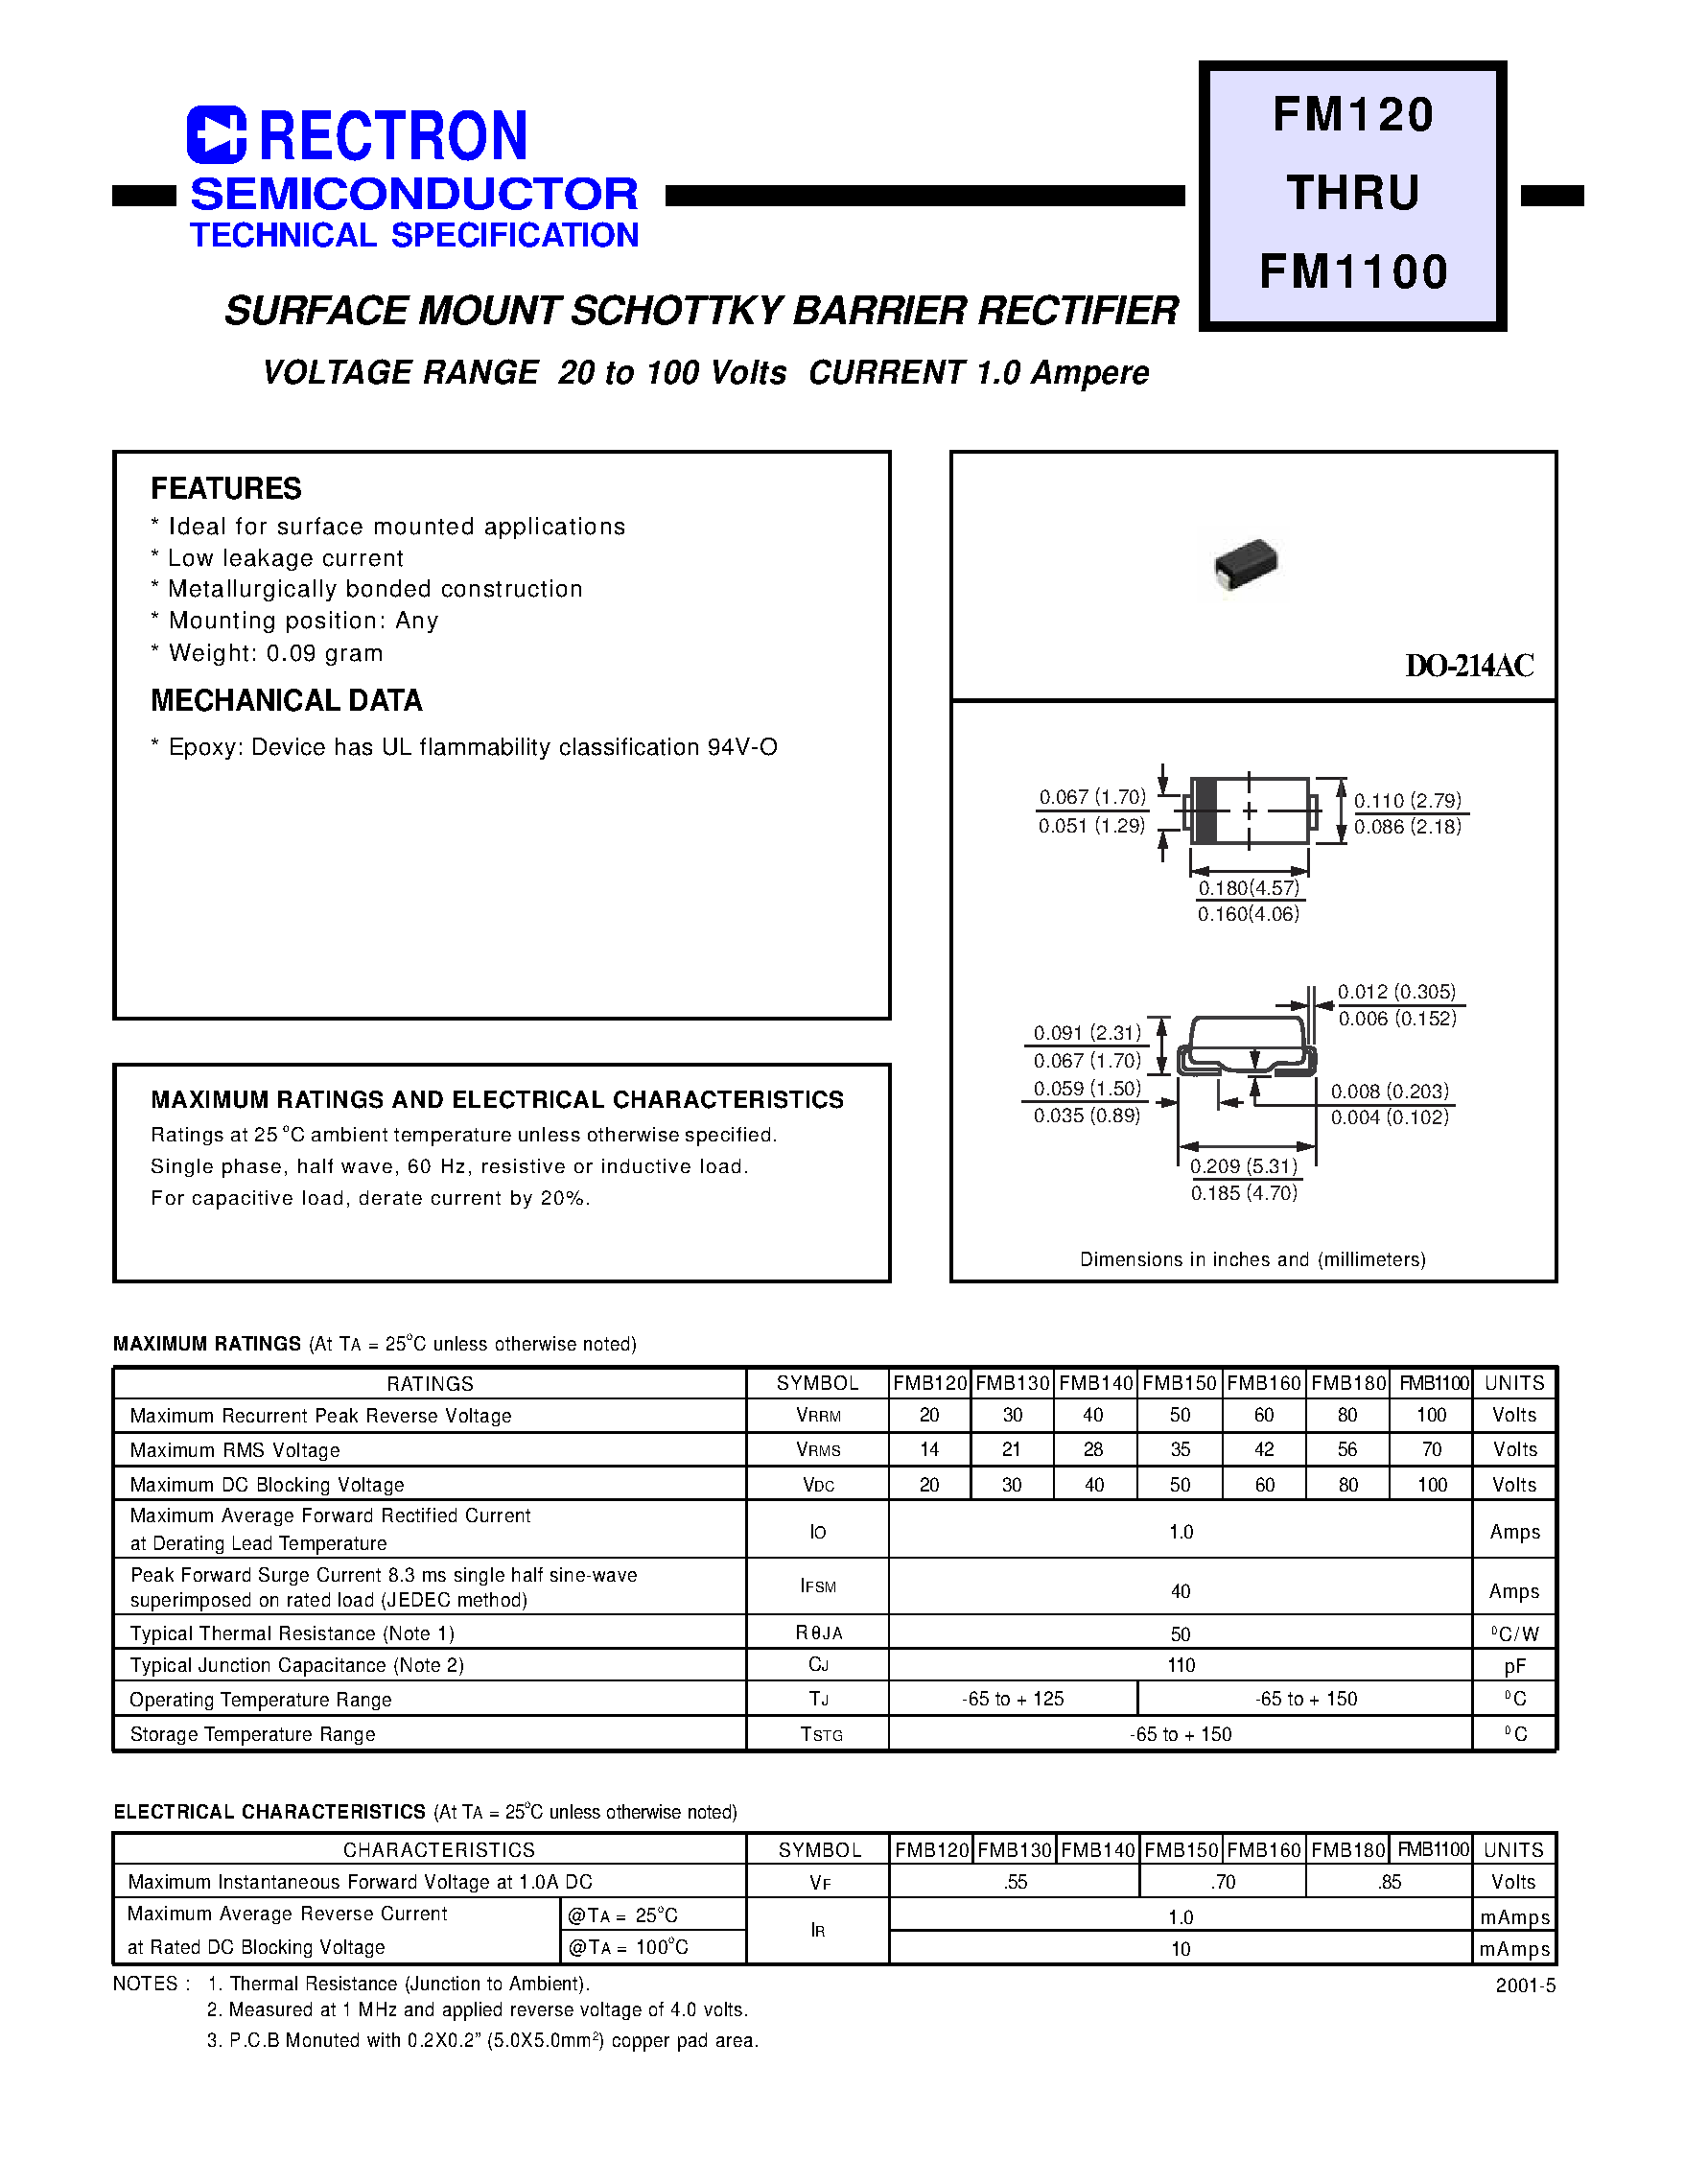 Datasheet FMB130 - SURFACE MOUNT SCHOTTKY BARRIER RECTIFIER (VOLTAGE RANGE 20 to 100 Volts CURRENT 1.0 Ampere) page 1